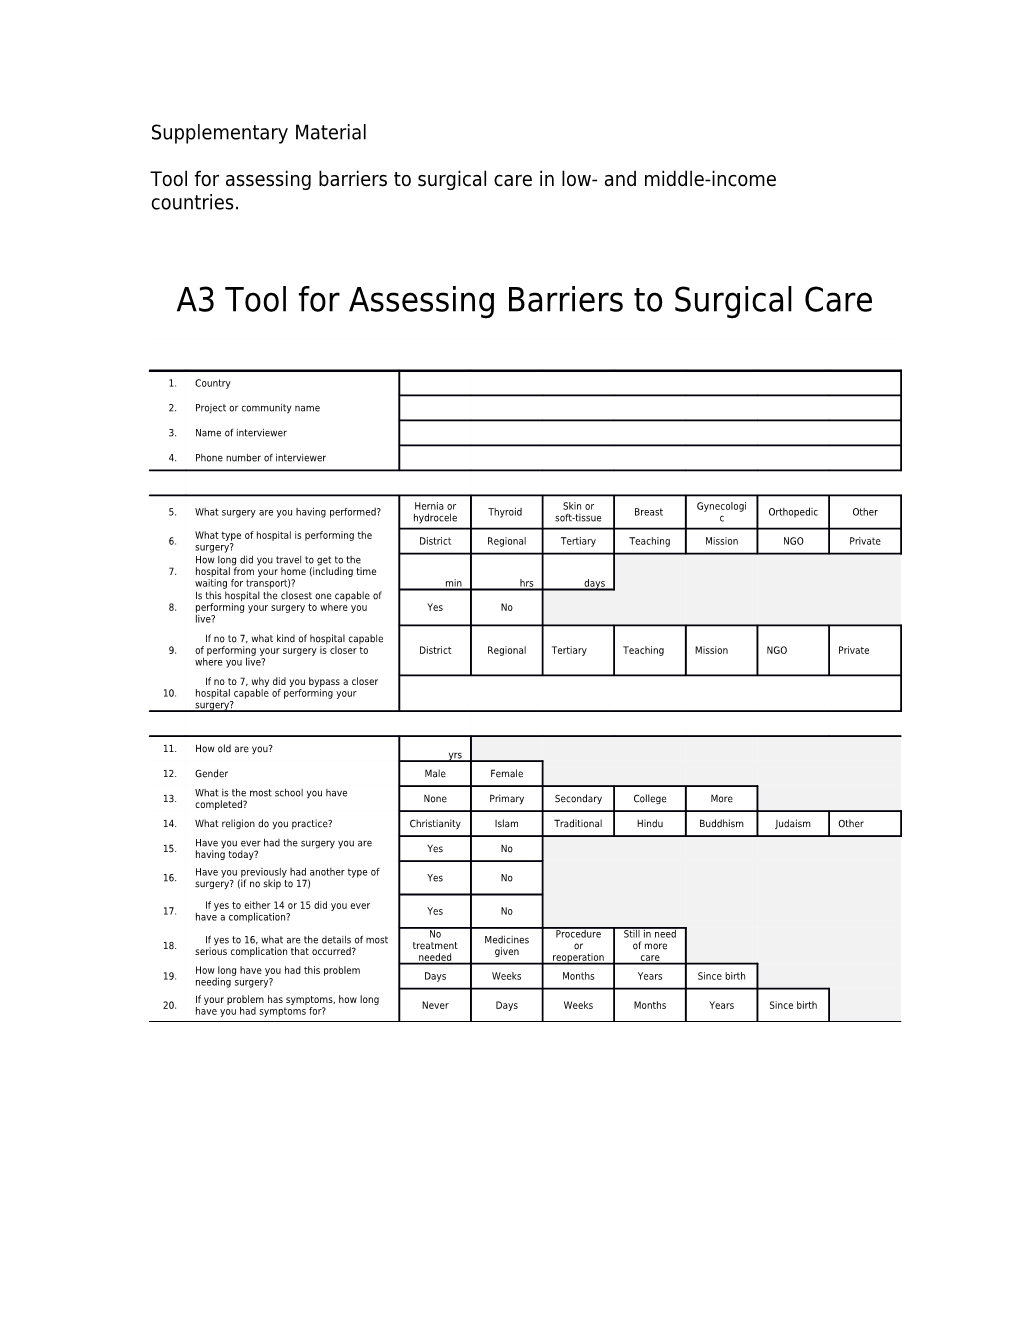 Tool for Assessing Barriers to Surgical Care in Low- and Middle-Income Countries